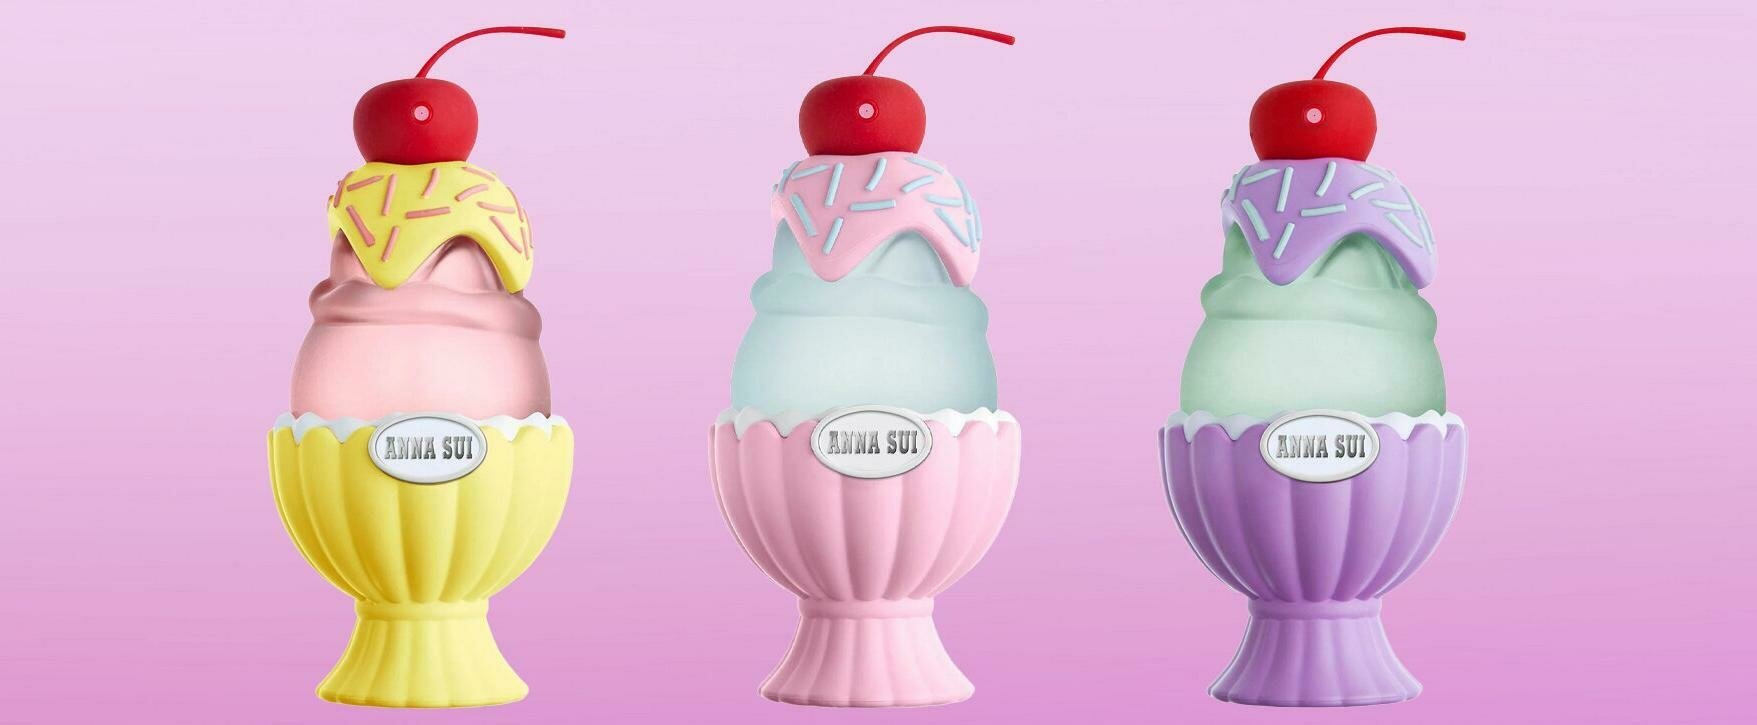 A Playful Ode to Ice Cream: The New Sundae Fragrance Range by Anna Sui